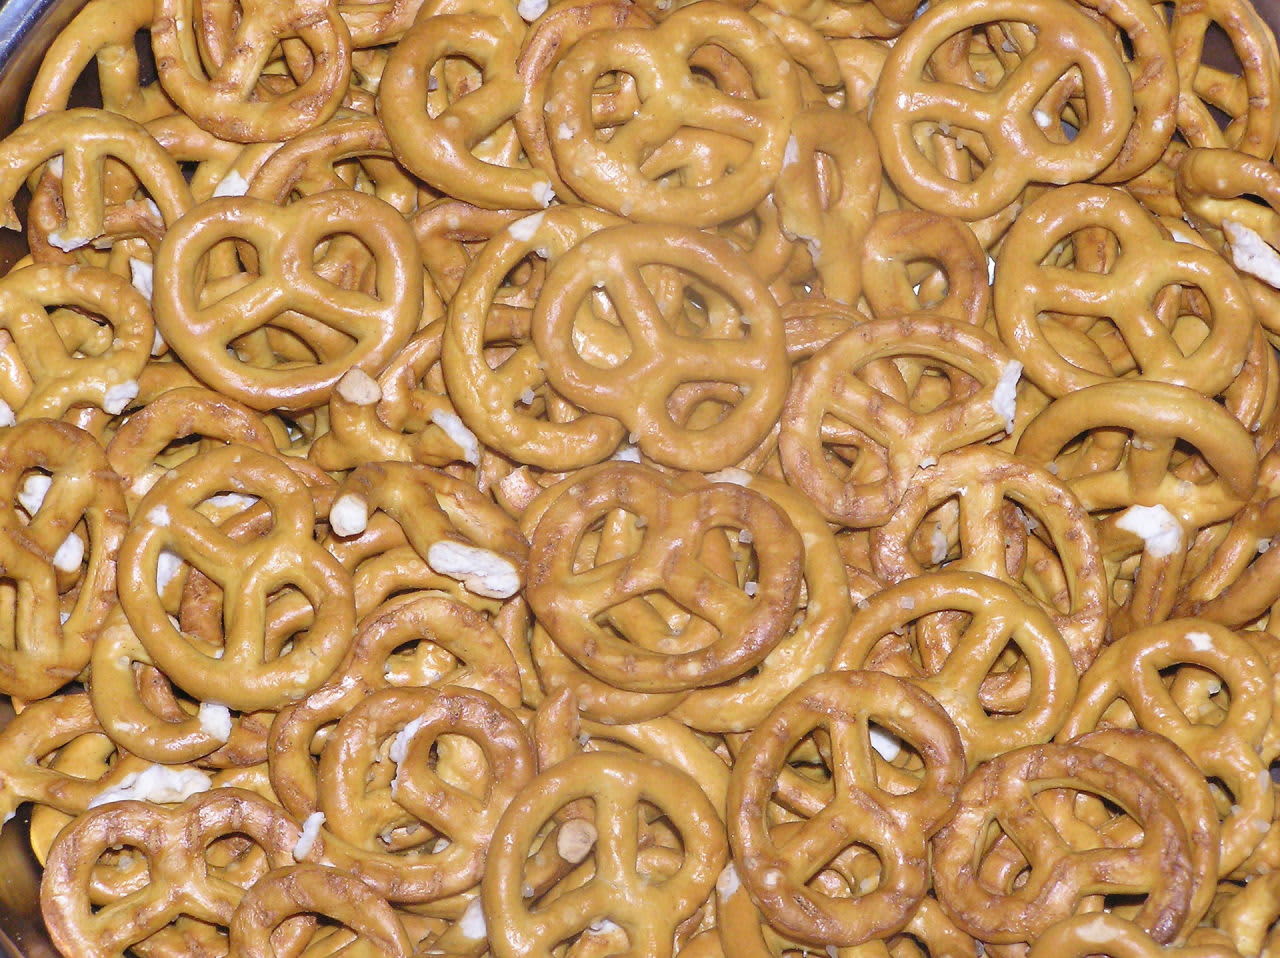 Frito-Lay has issued a recall of Rold Gold pretzels.